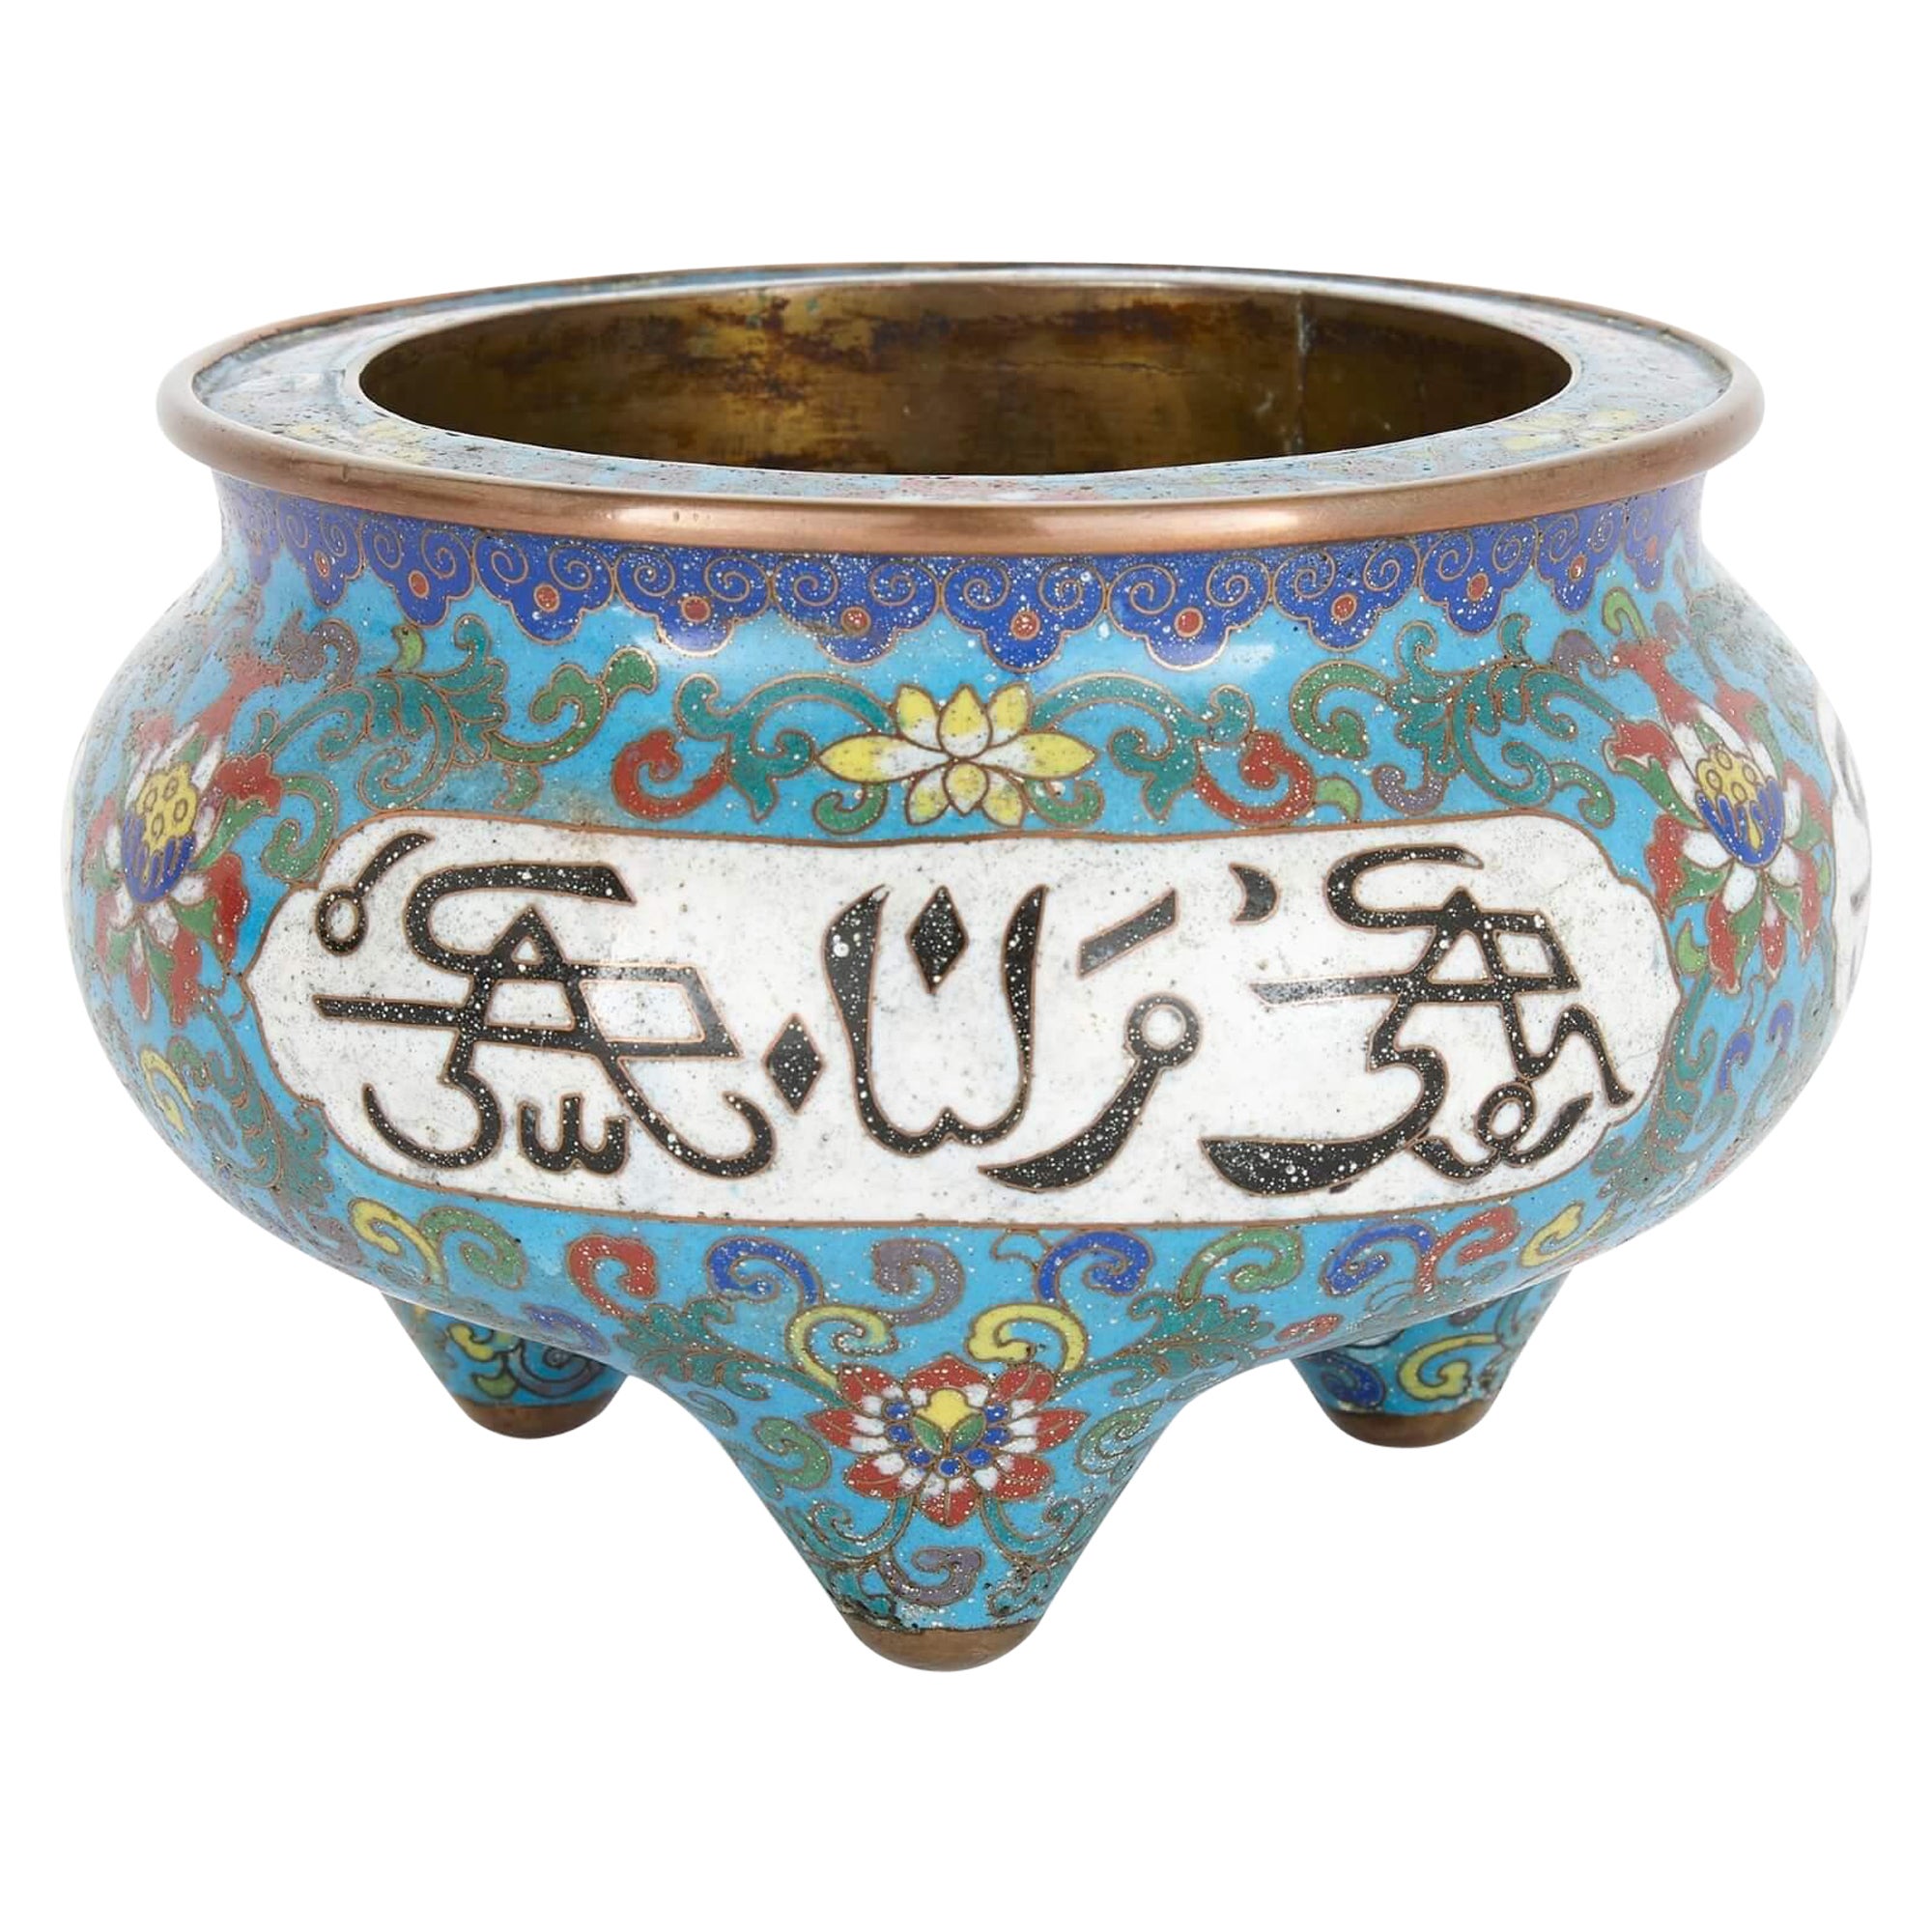 Qing Dynasty Cloisonné Enamel Chinese Vase with Arabic Inscriptions